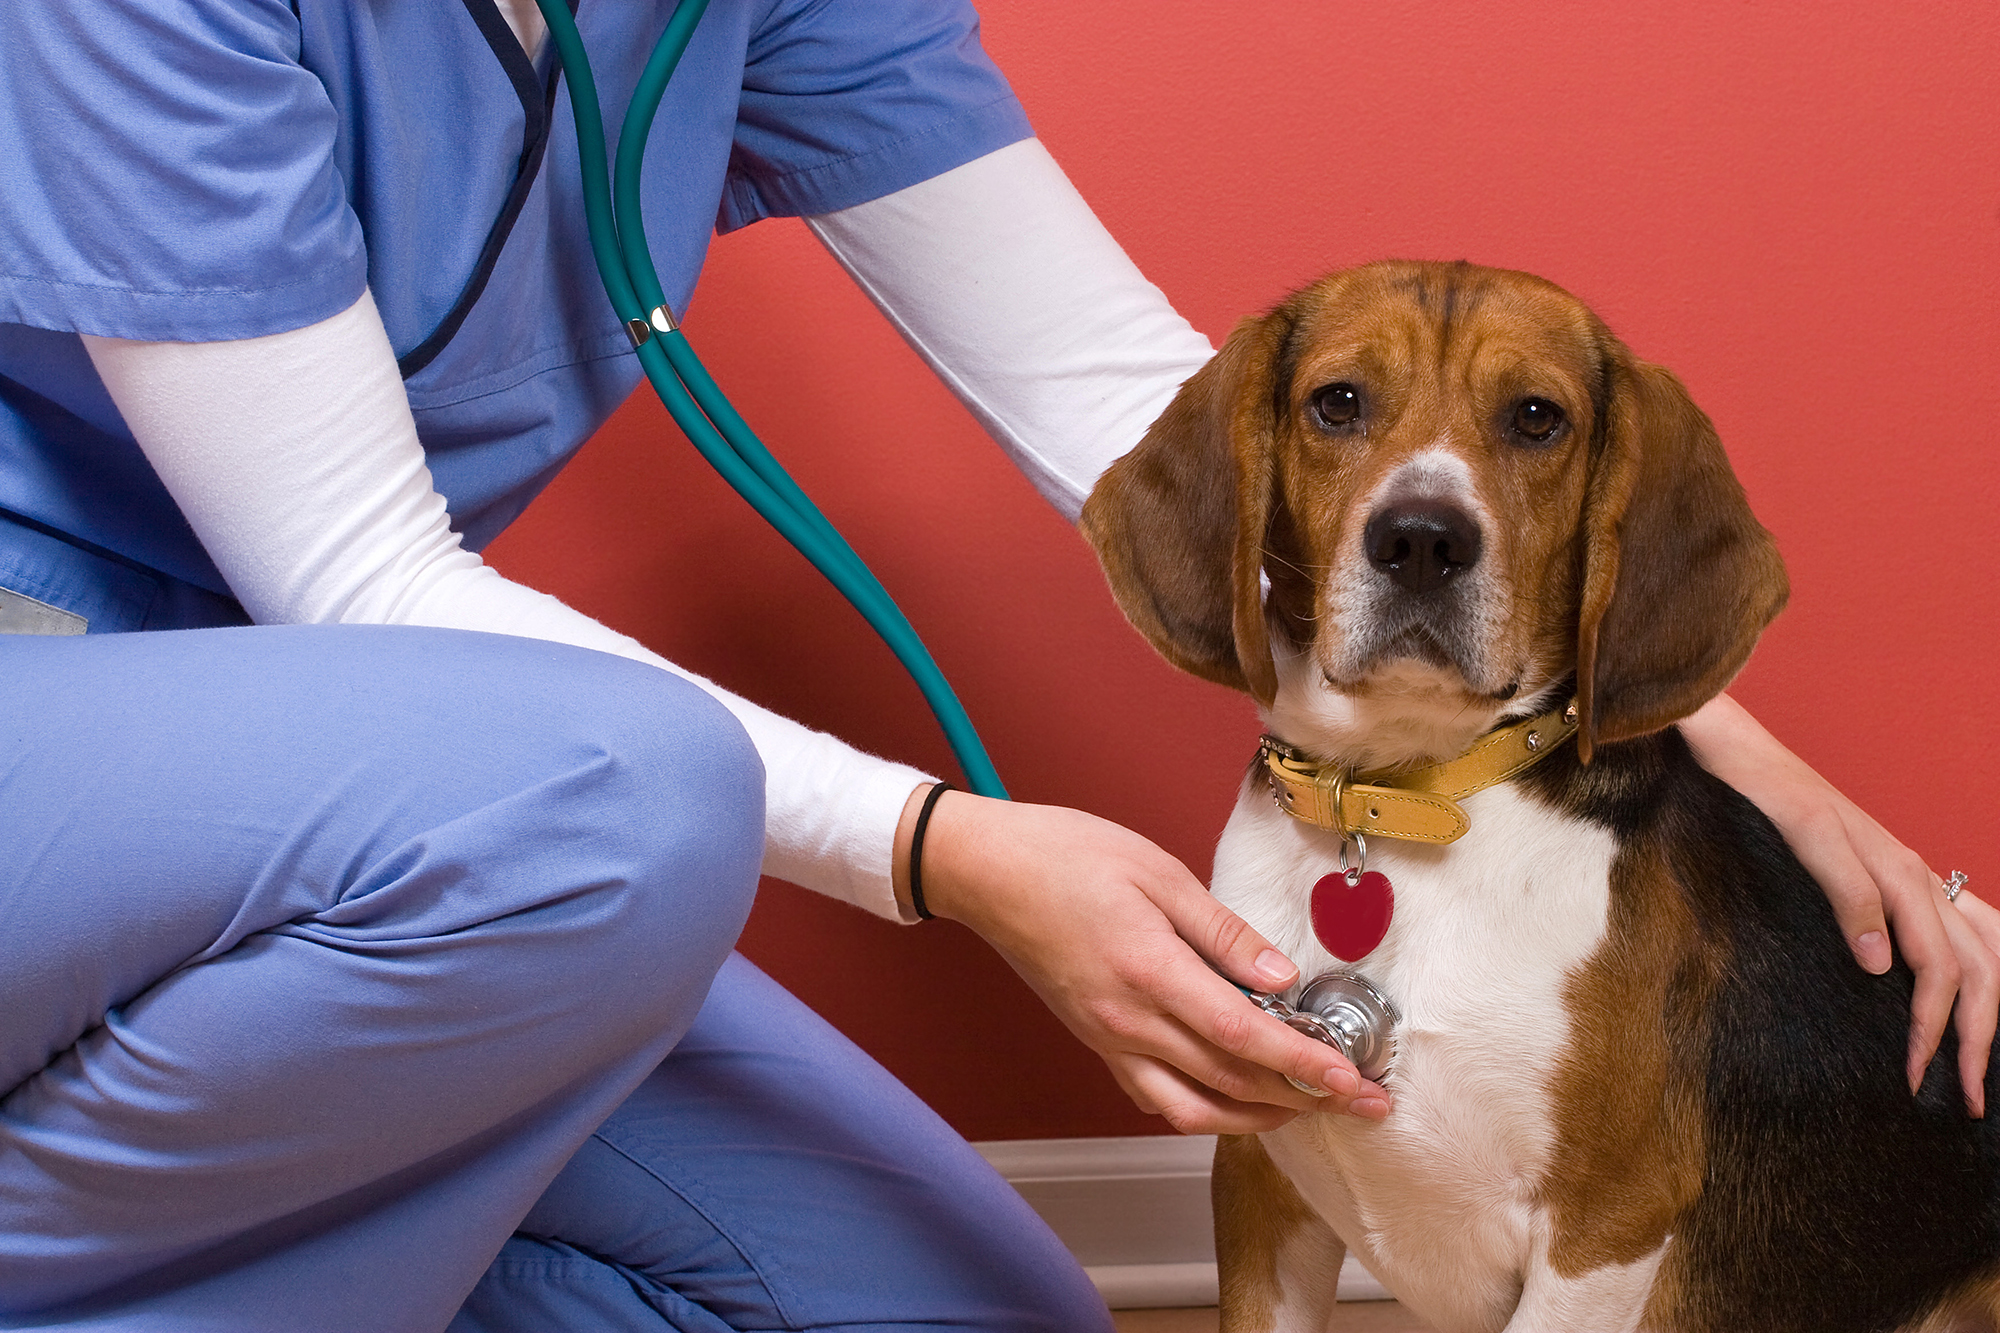 Descriptive image: a dog being examined with a stethoscope by medical staff